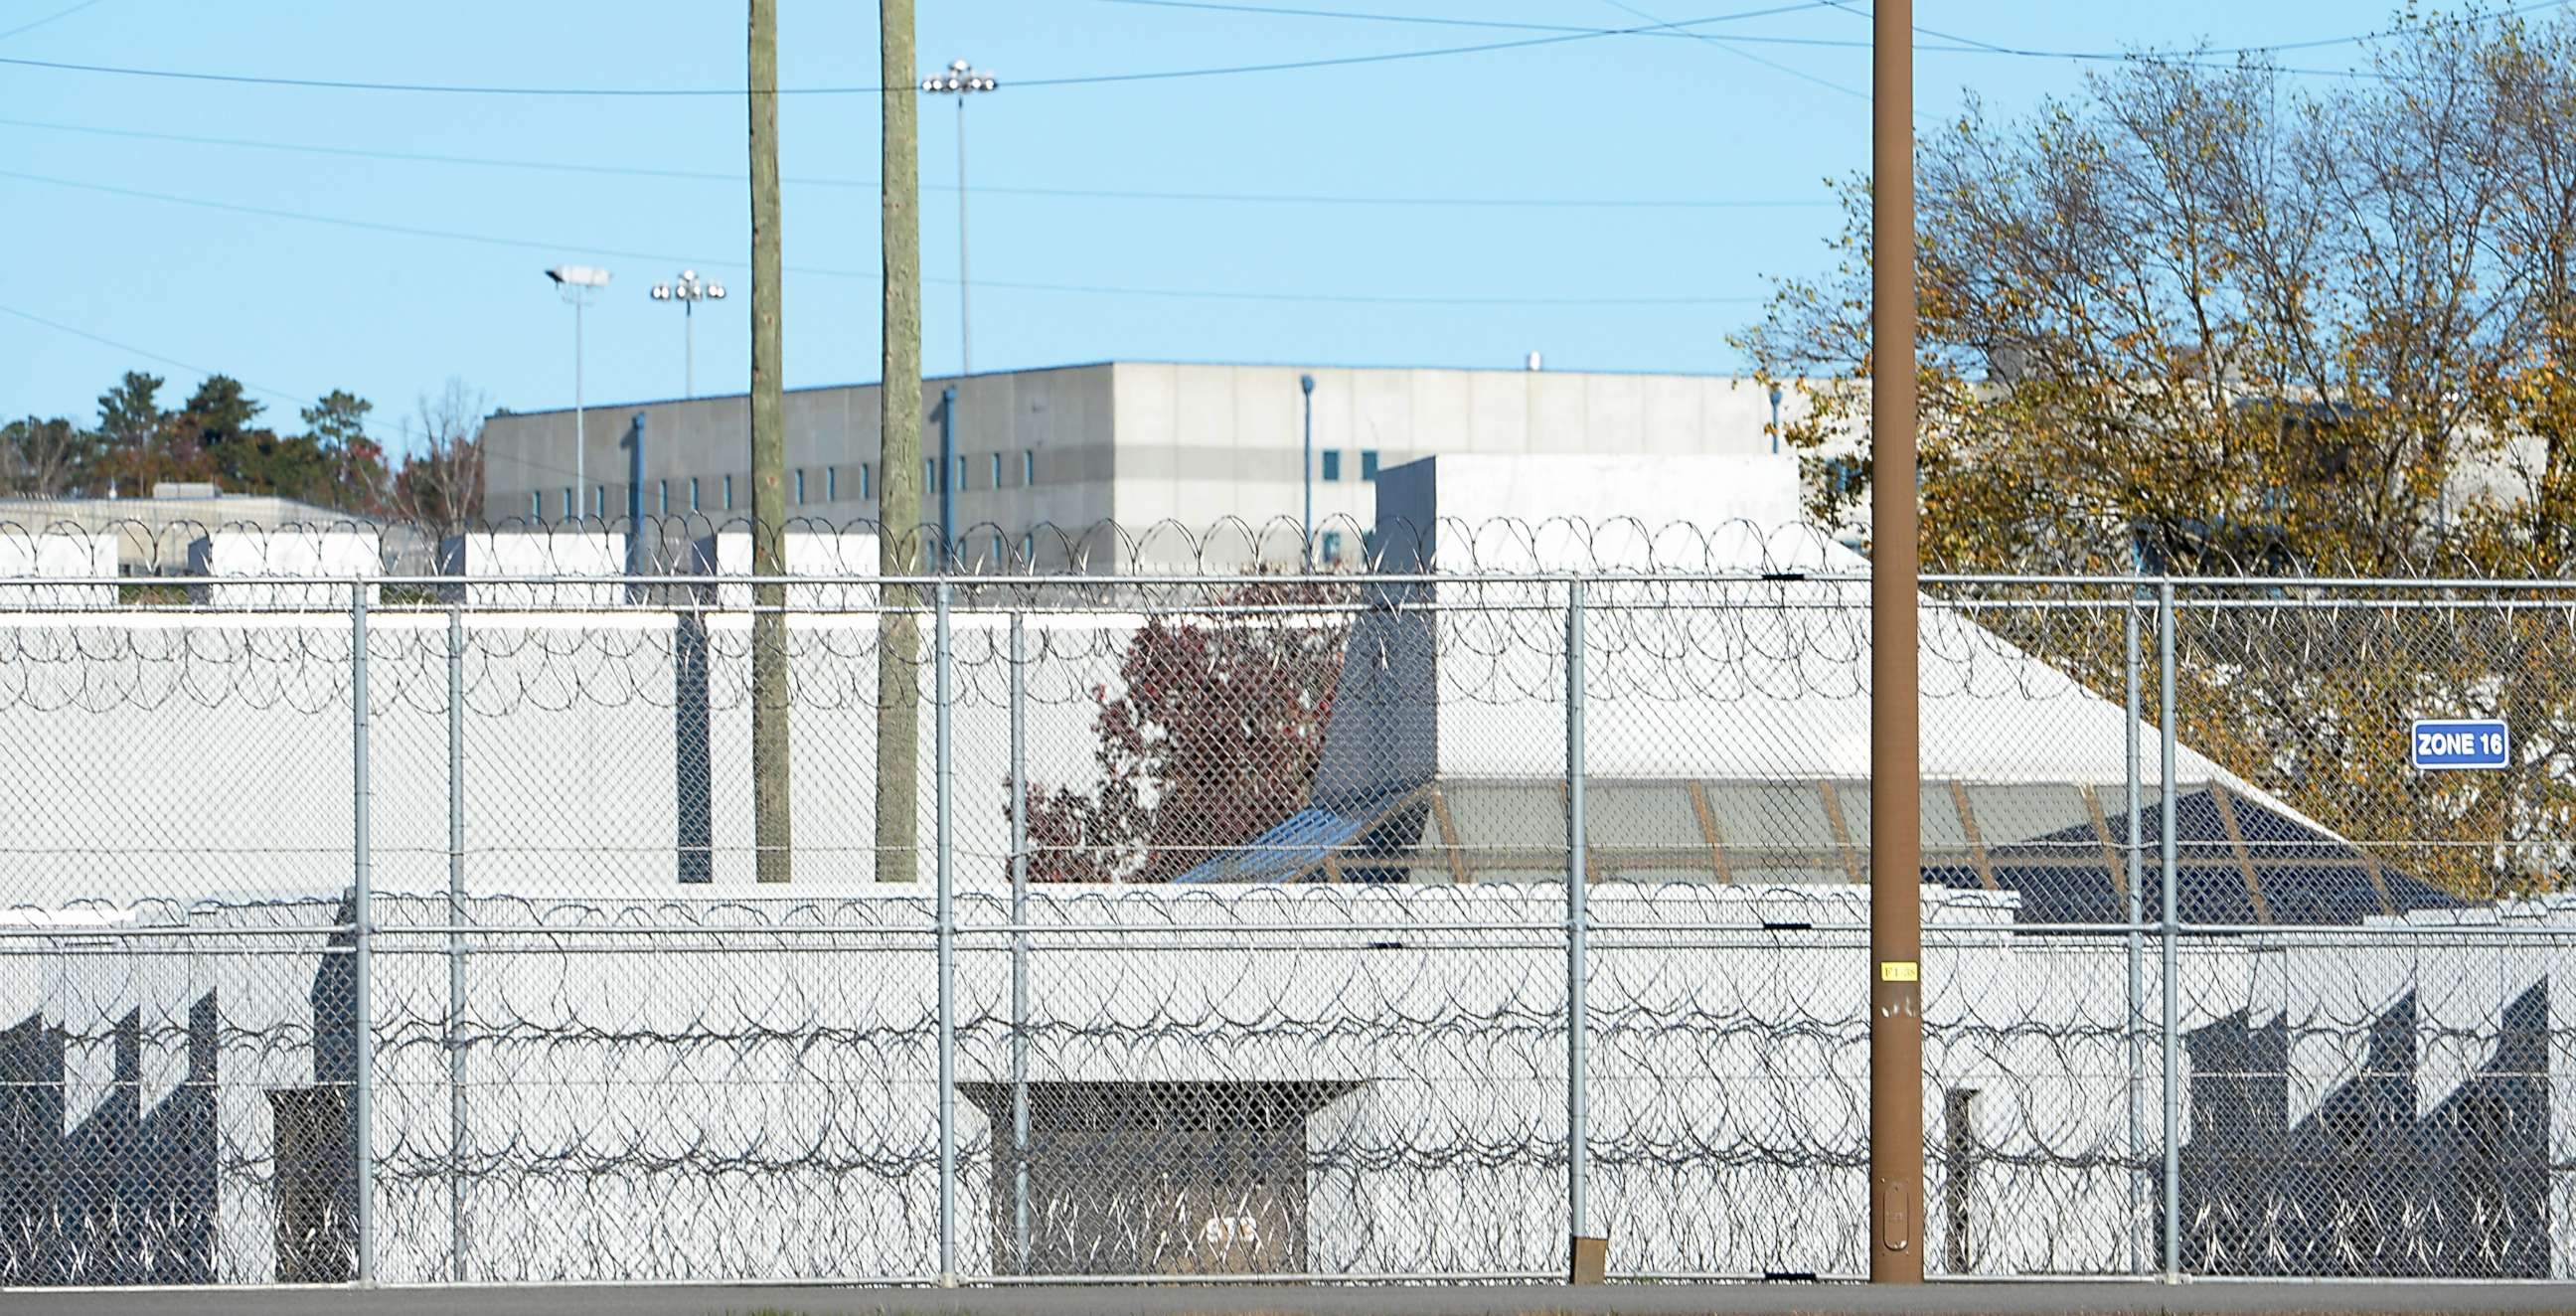 PHOTO: Fencing surrounds a federal prison in  Butner, N.C. on Nov. 20, 2015.